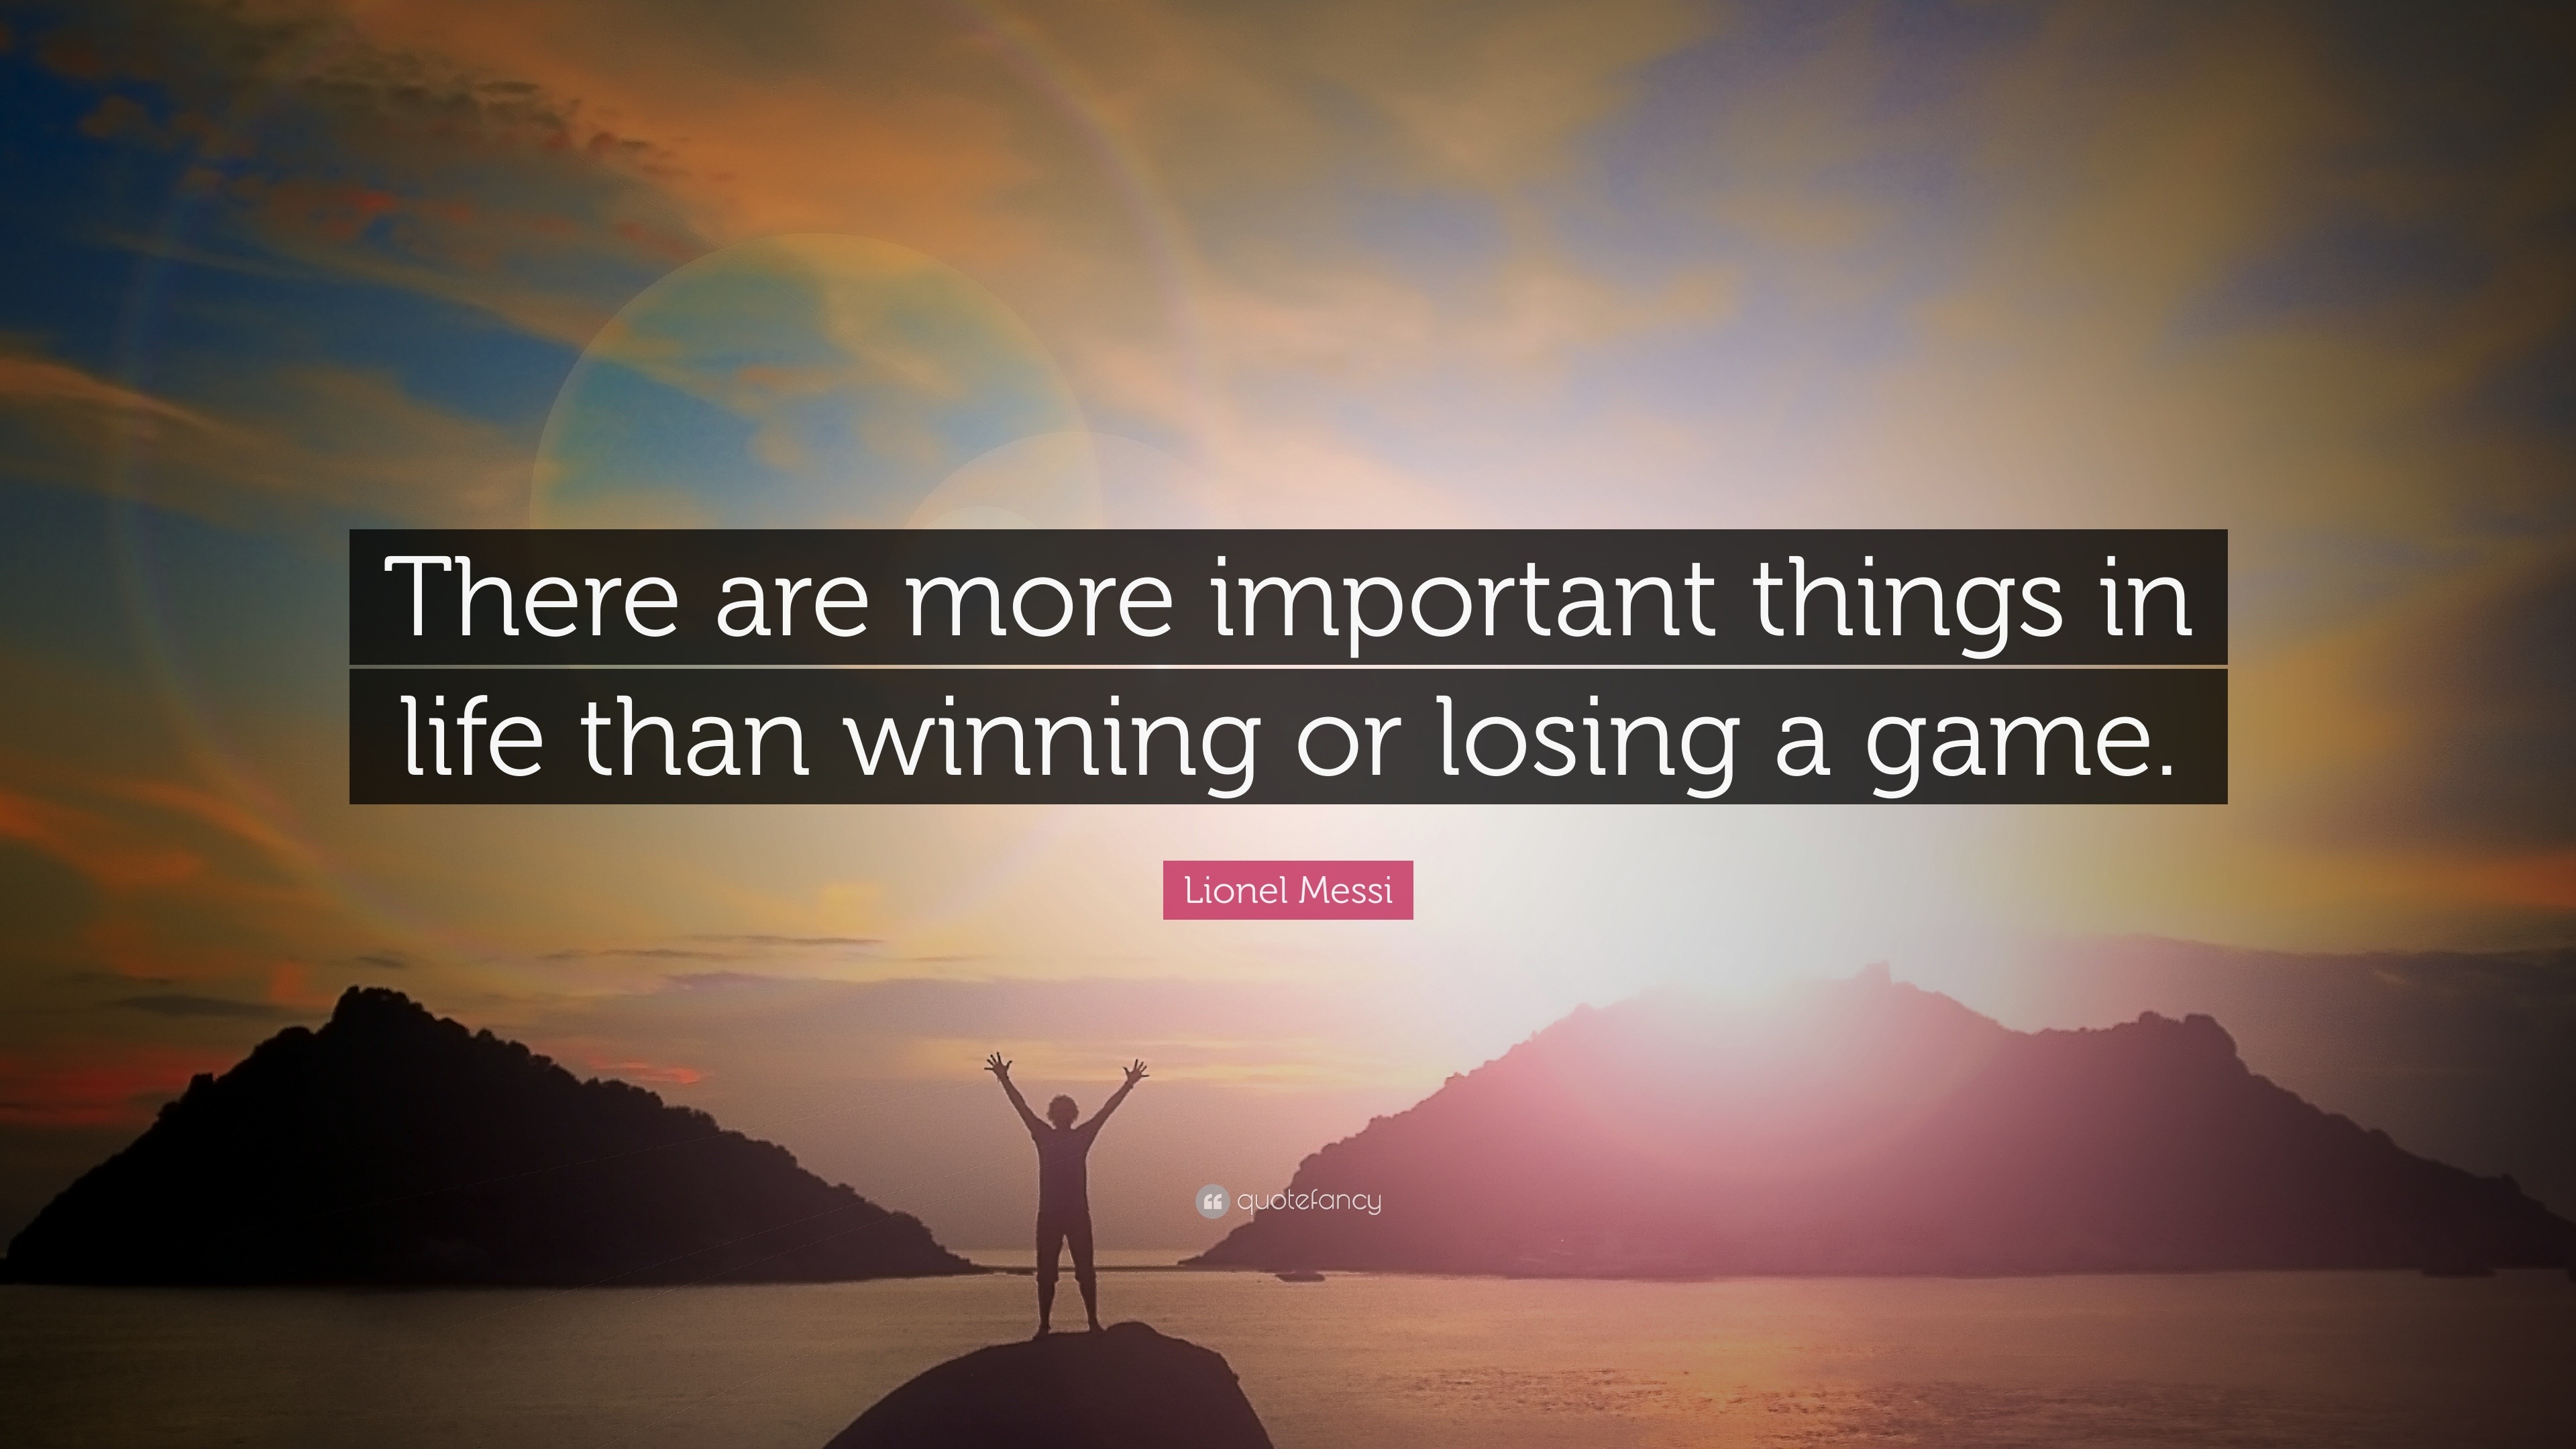 Lionel Messi Quote “There are more important things in life than winning or losing